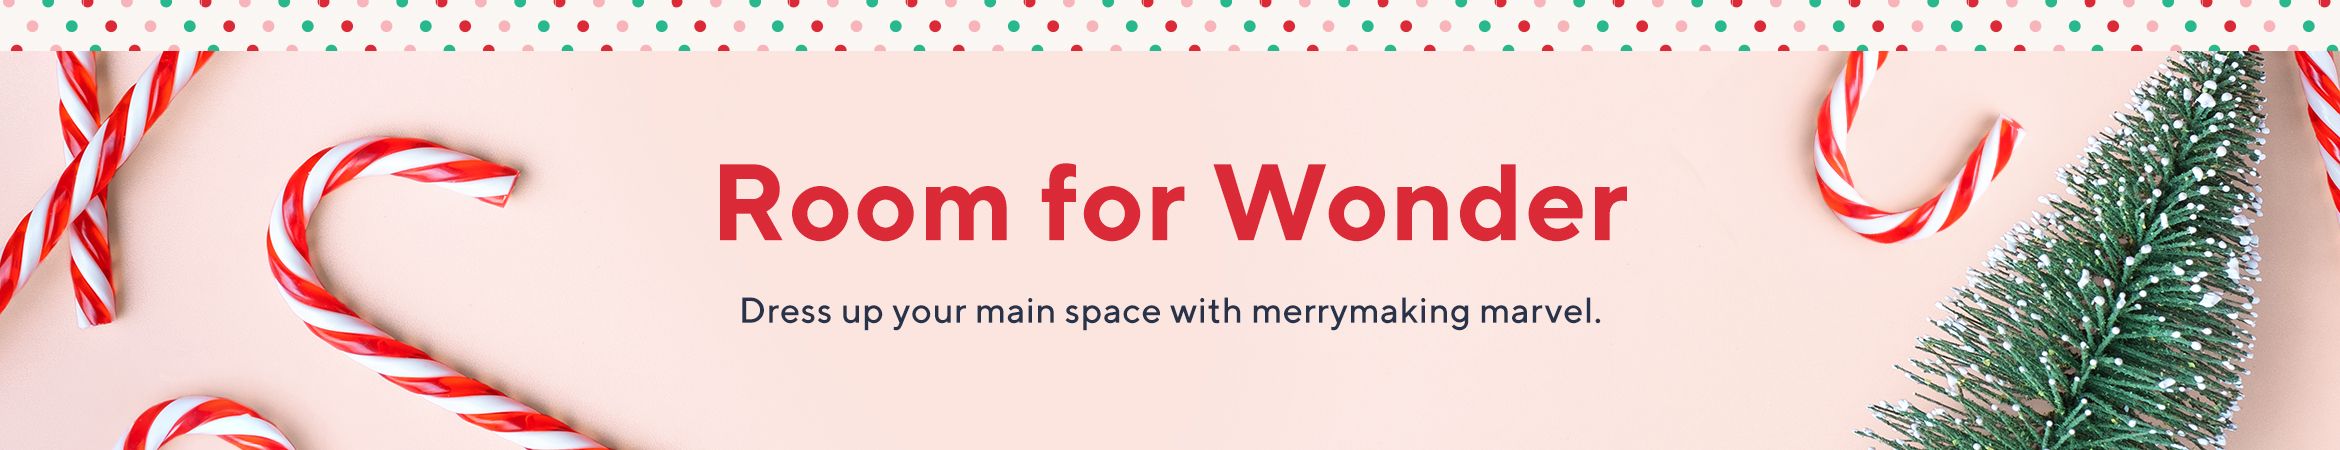 Room for Wonder - Dress up your main space with merrymaking marvel.